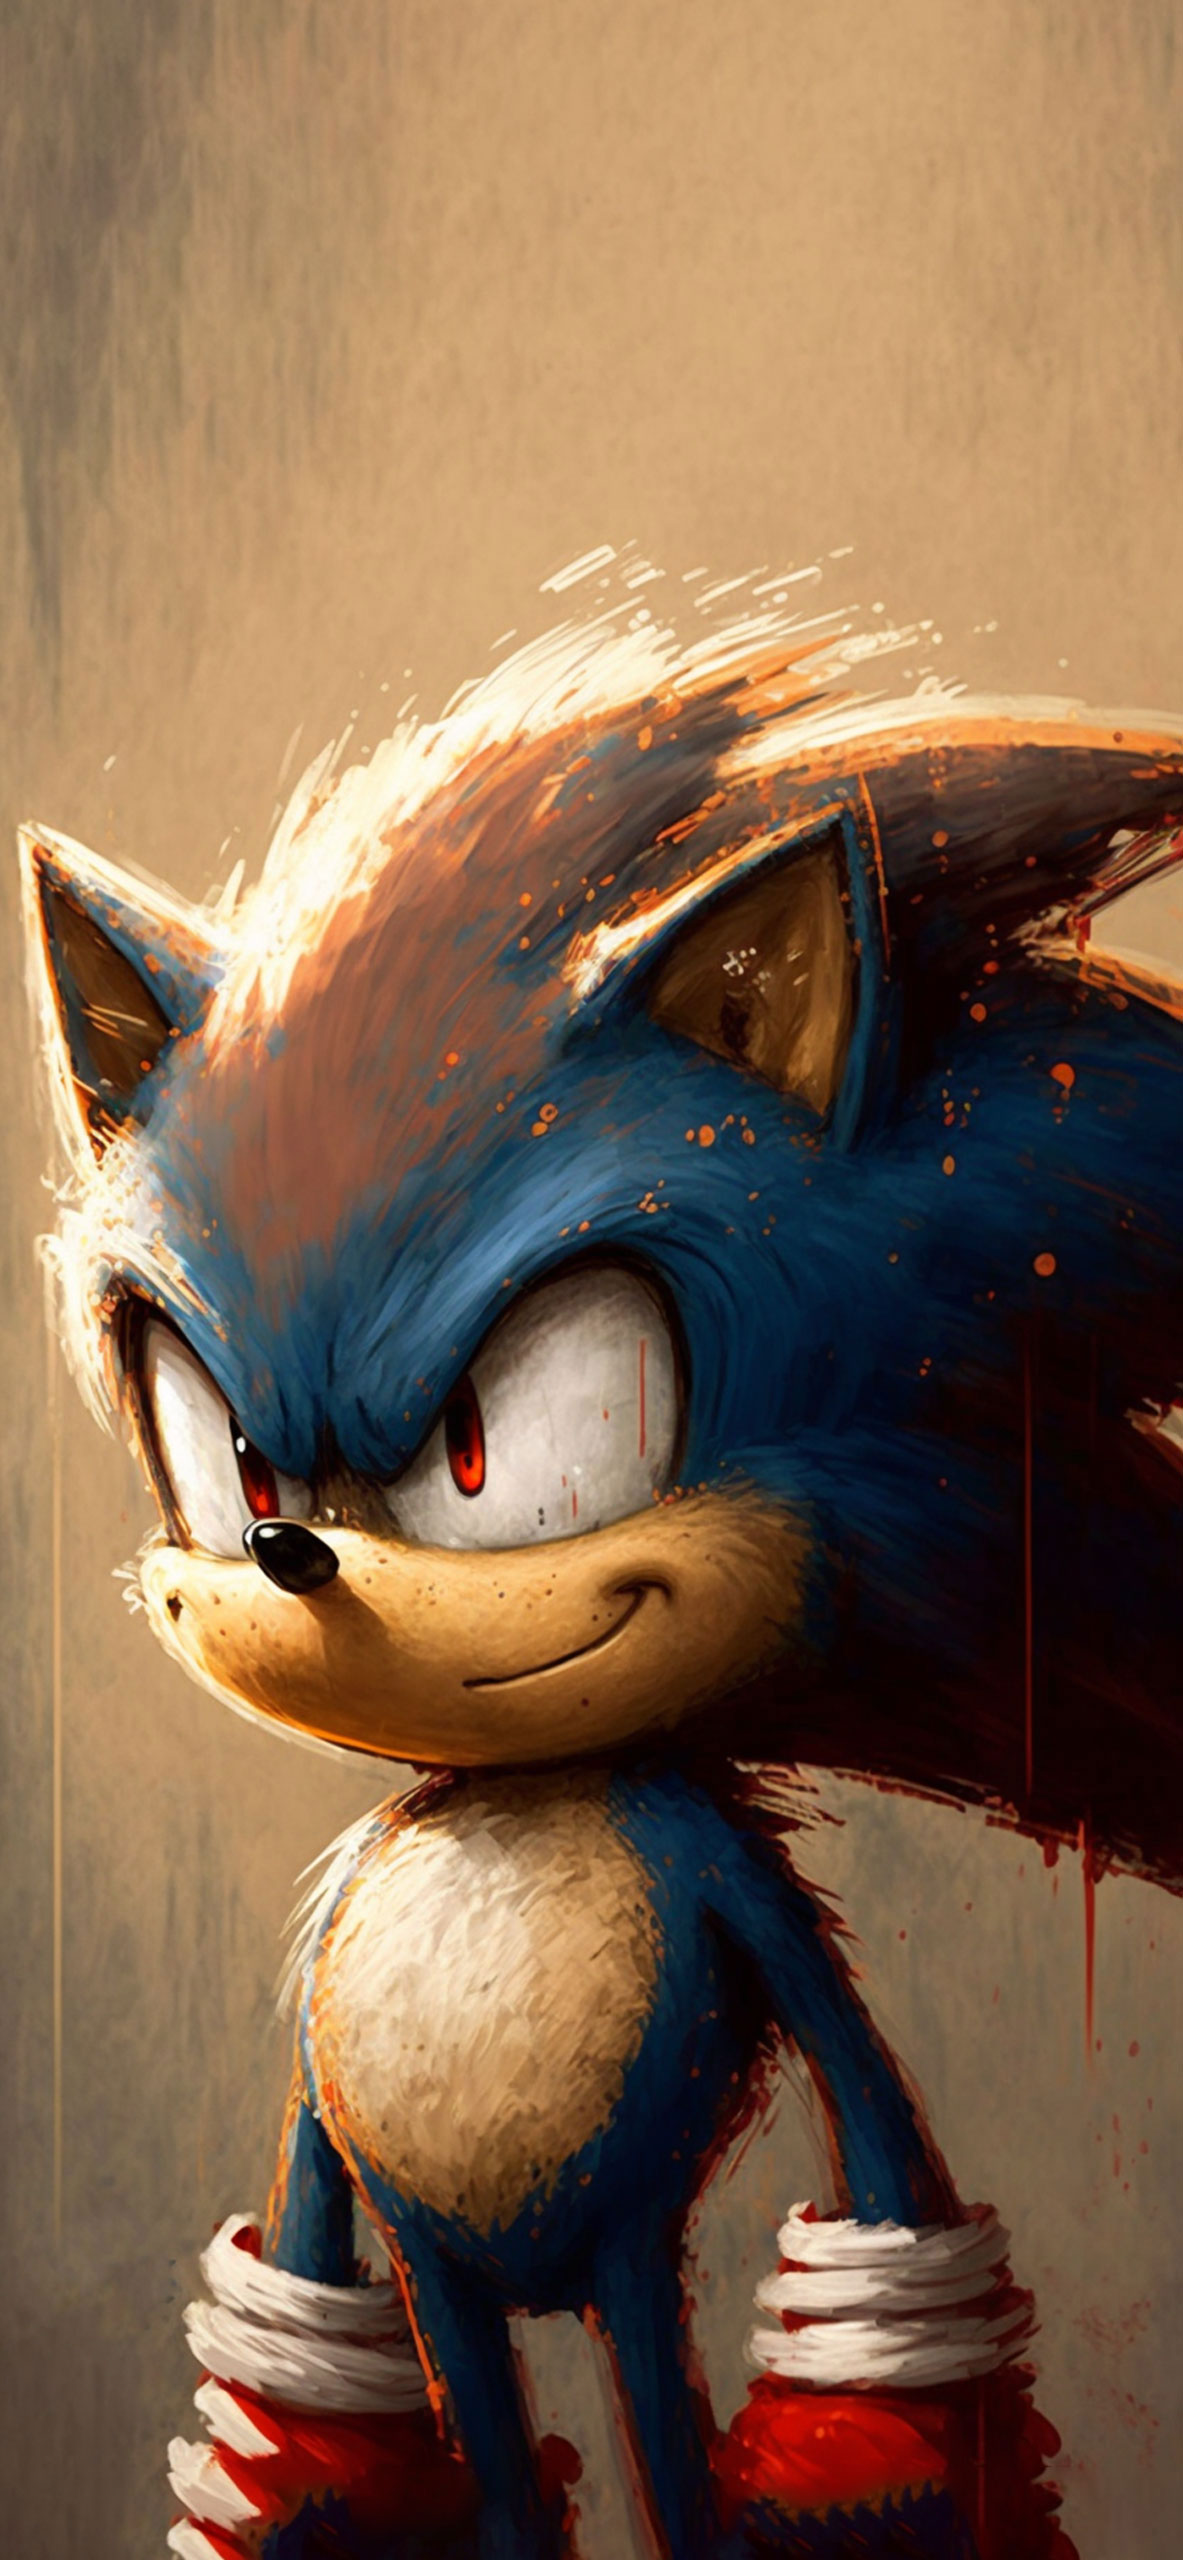 Sonic Art Wallpapers - Sonic Aesthetic Wallpaper iPhone & Android